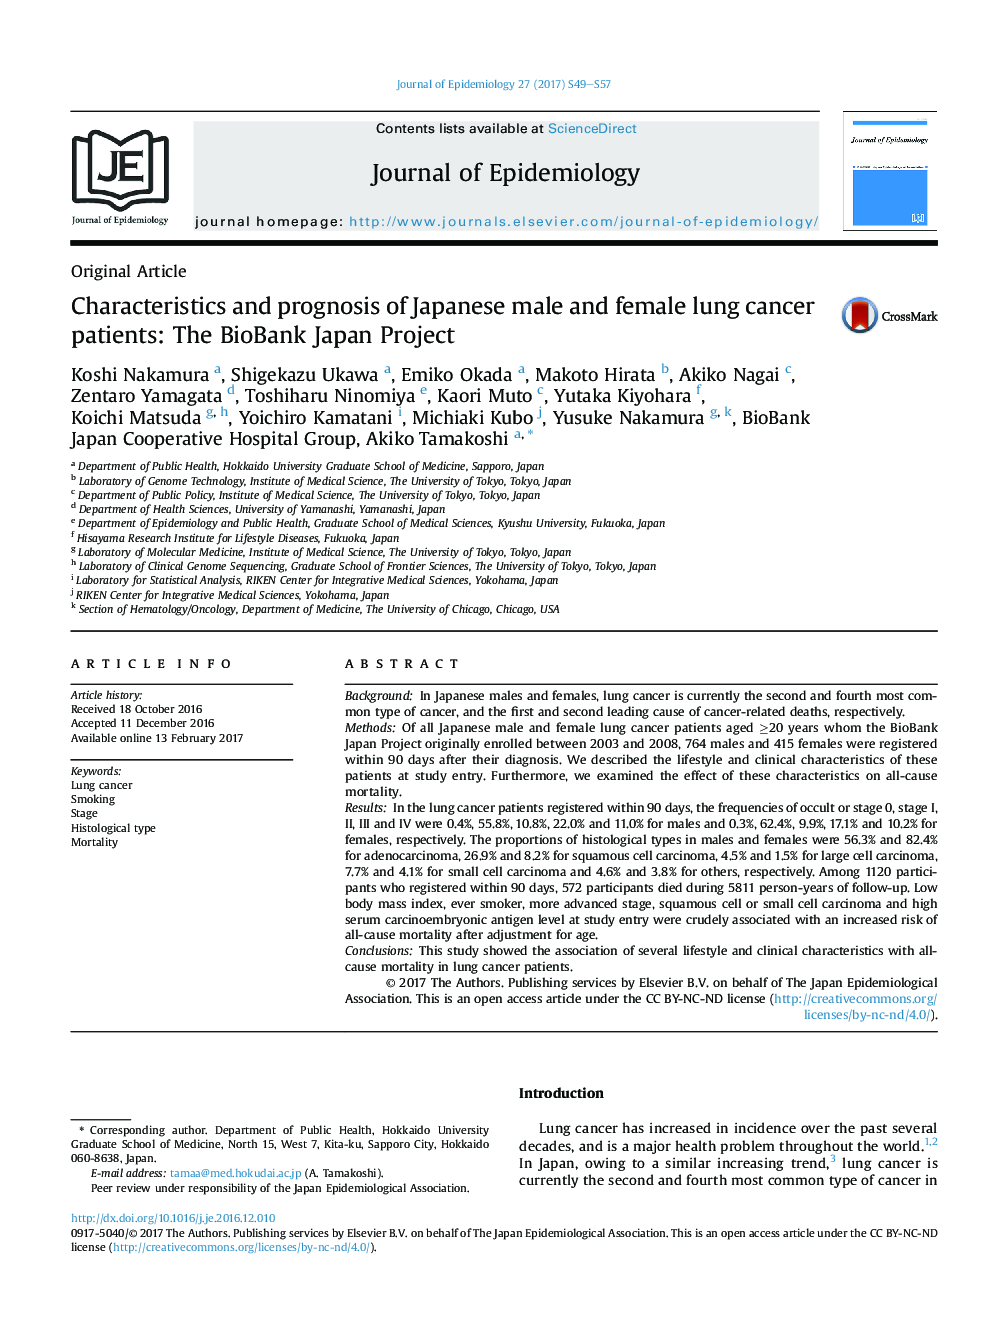 Characteristics and prognosis of Japanese male and female lung cancer patients: The BioBank Japan Project